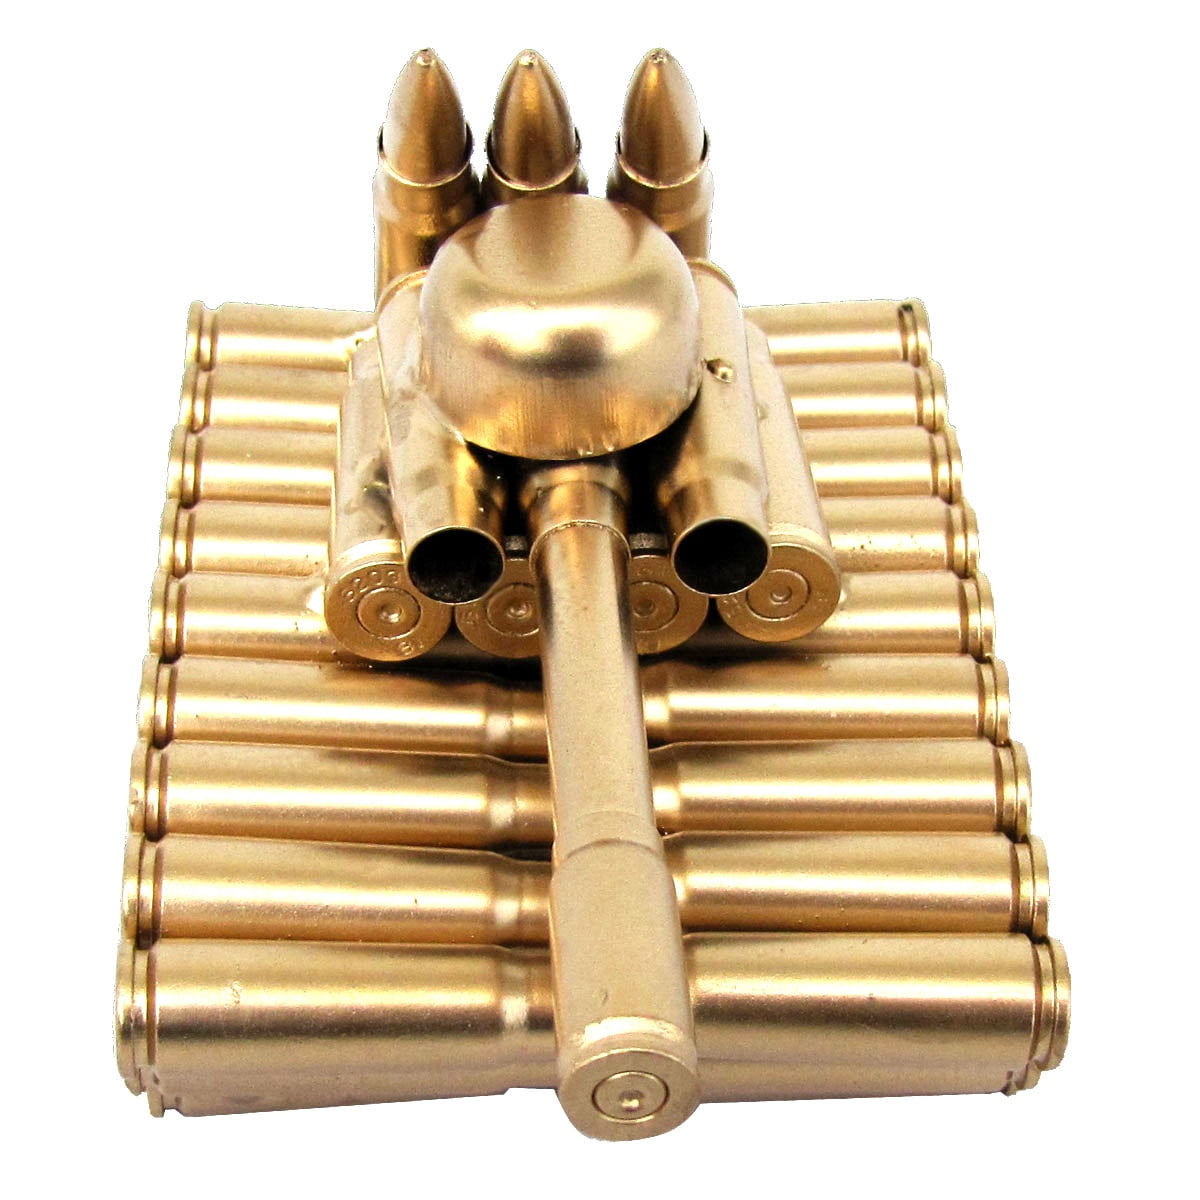 Bullet Shell Casing Shaped Army Tank Military Gift made from gun